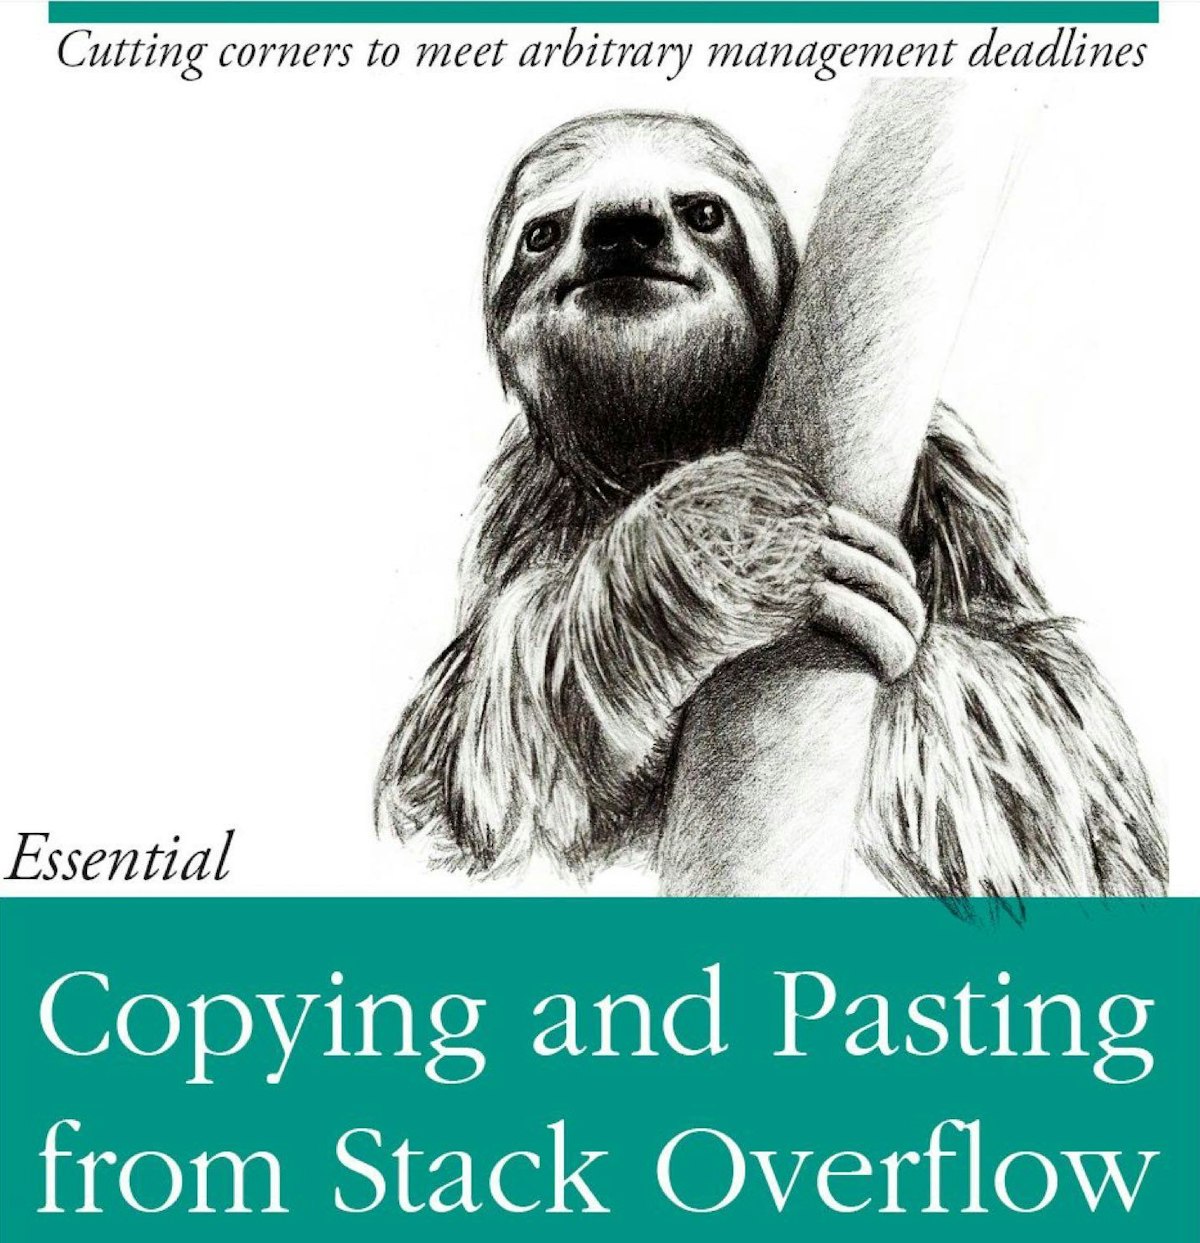 featured image - StackOverflow is a Symptom, Not a Solution